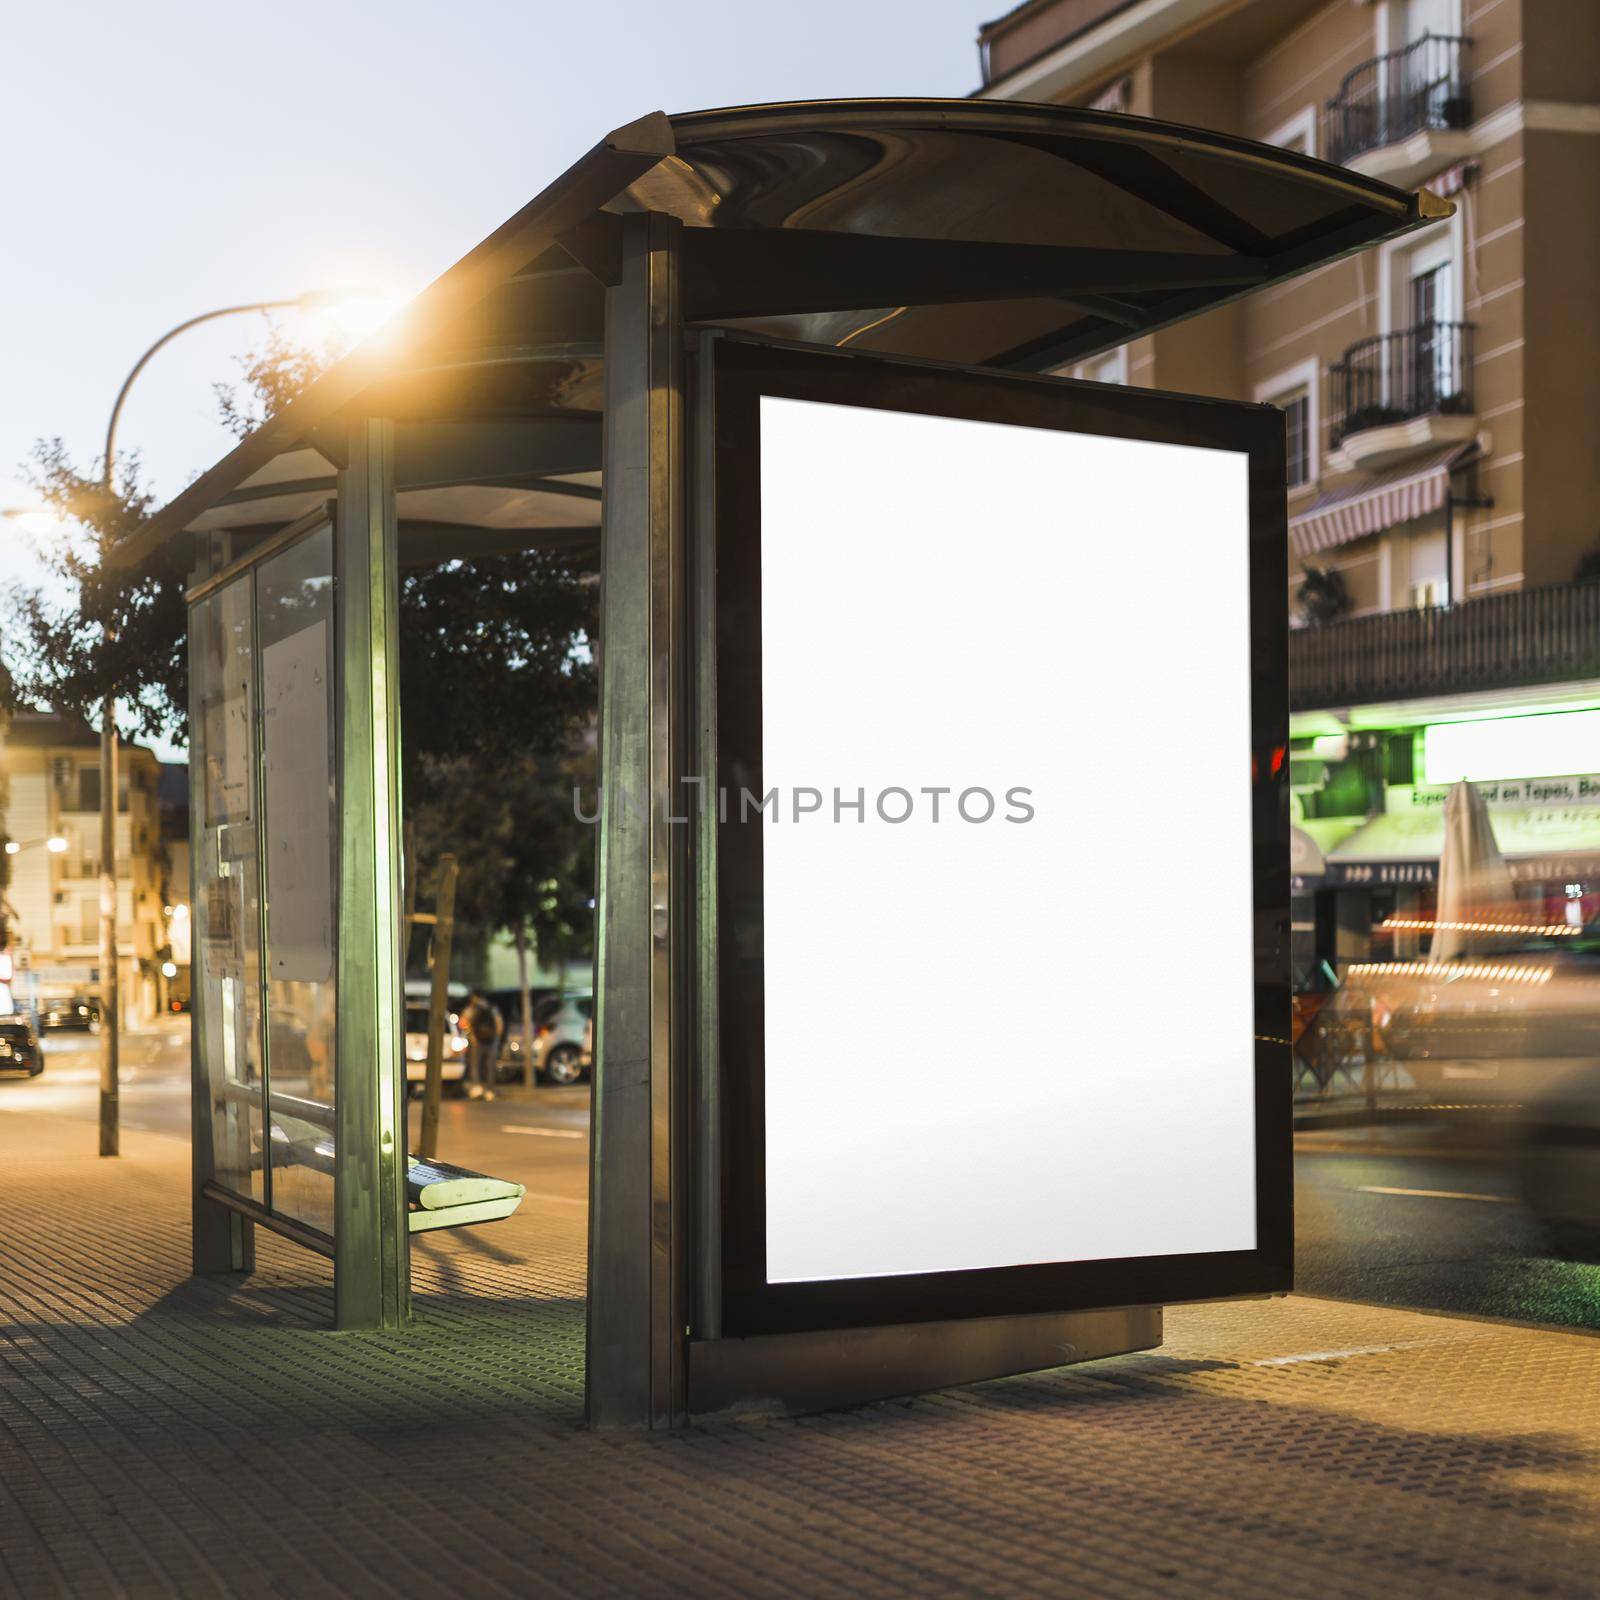 blank billboard bus stop shelter night 2. High quality beautiful photo concept by Zahard